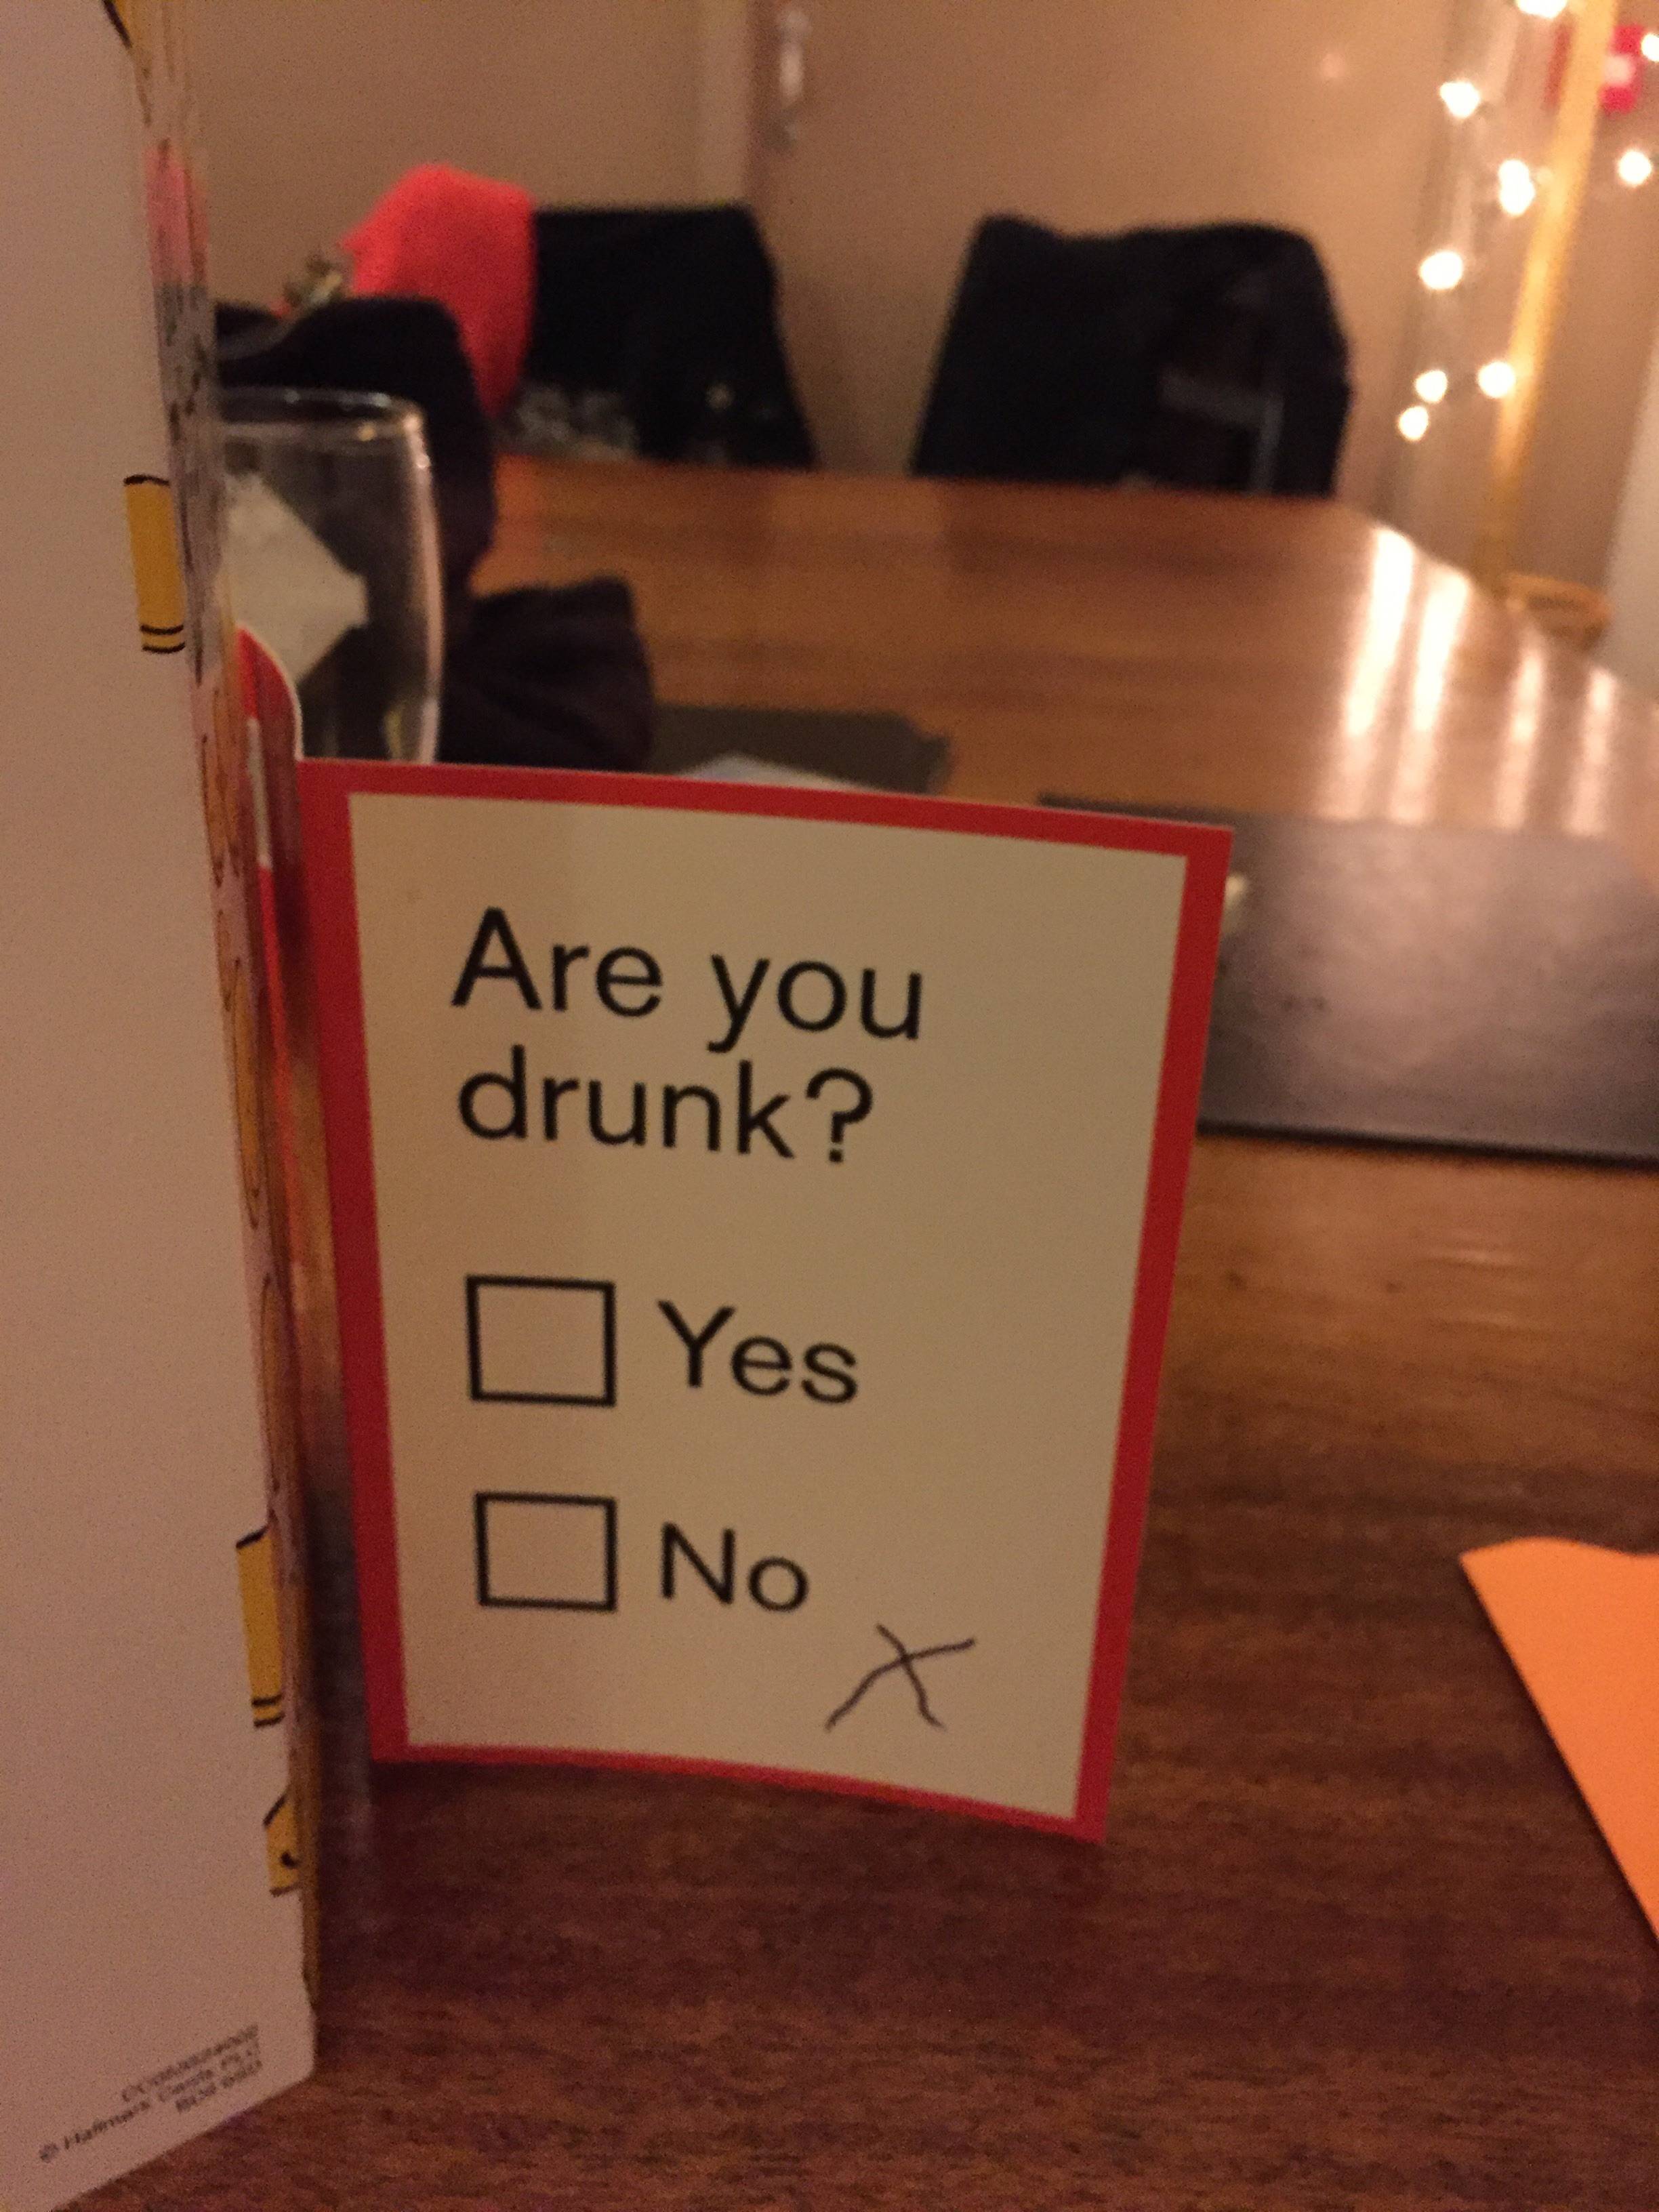 Drinking - Are you drunk? Yes o No